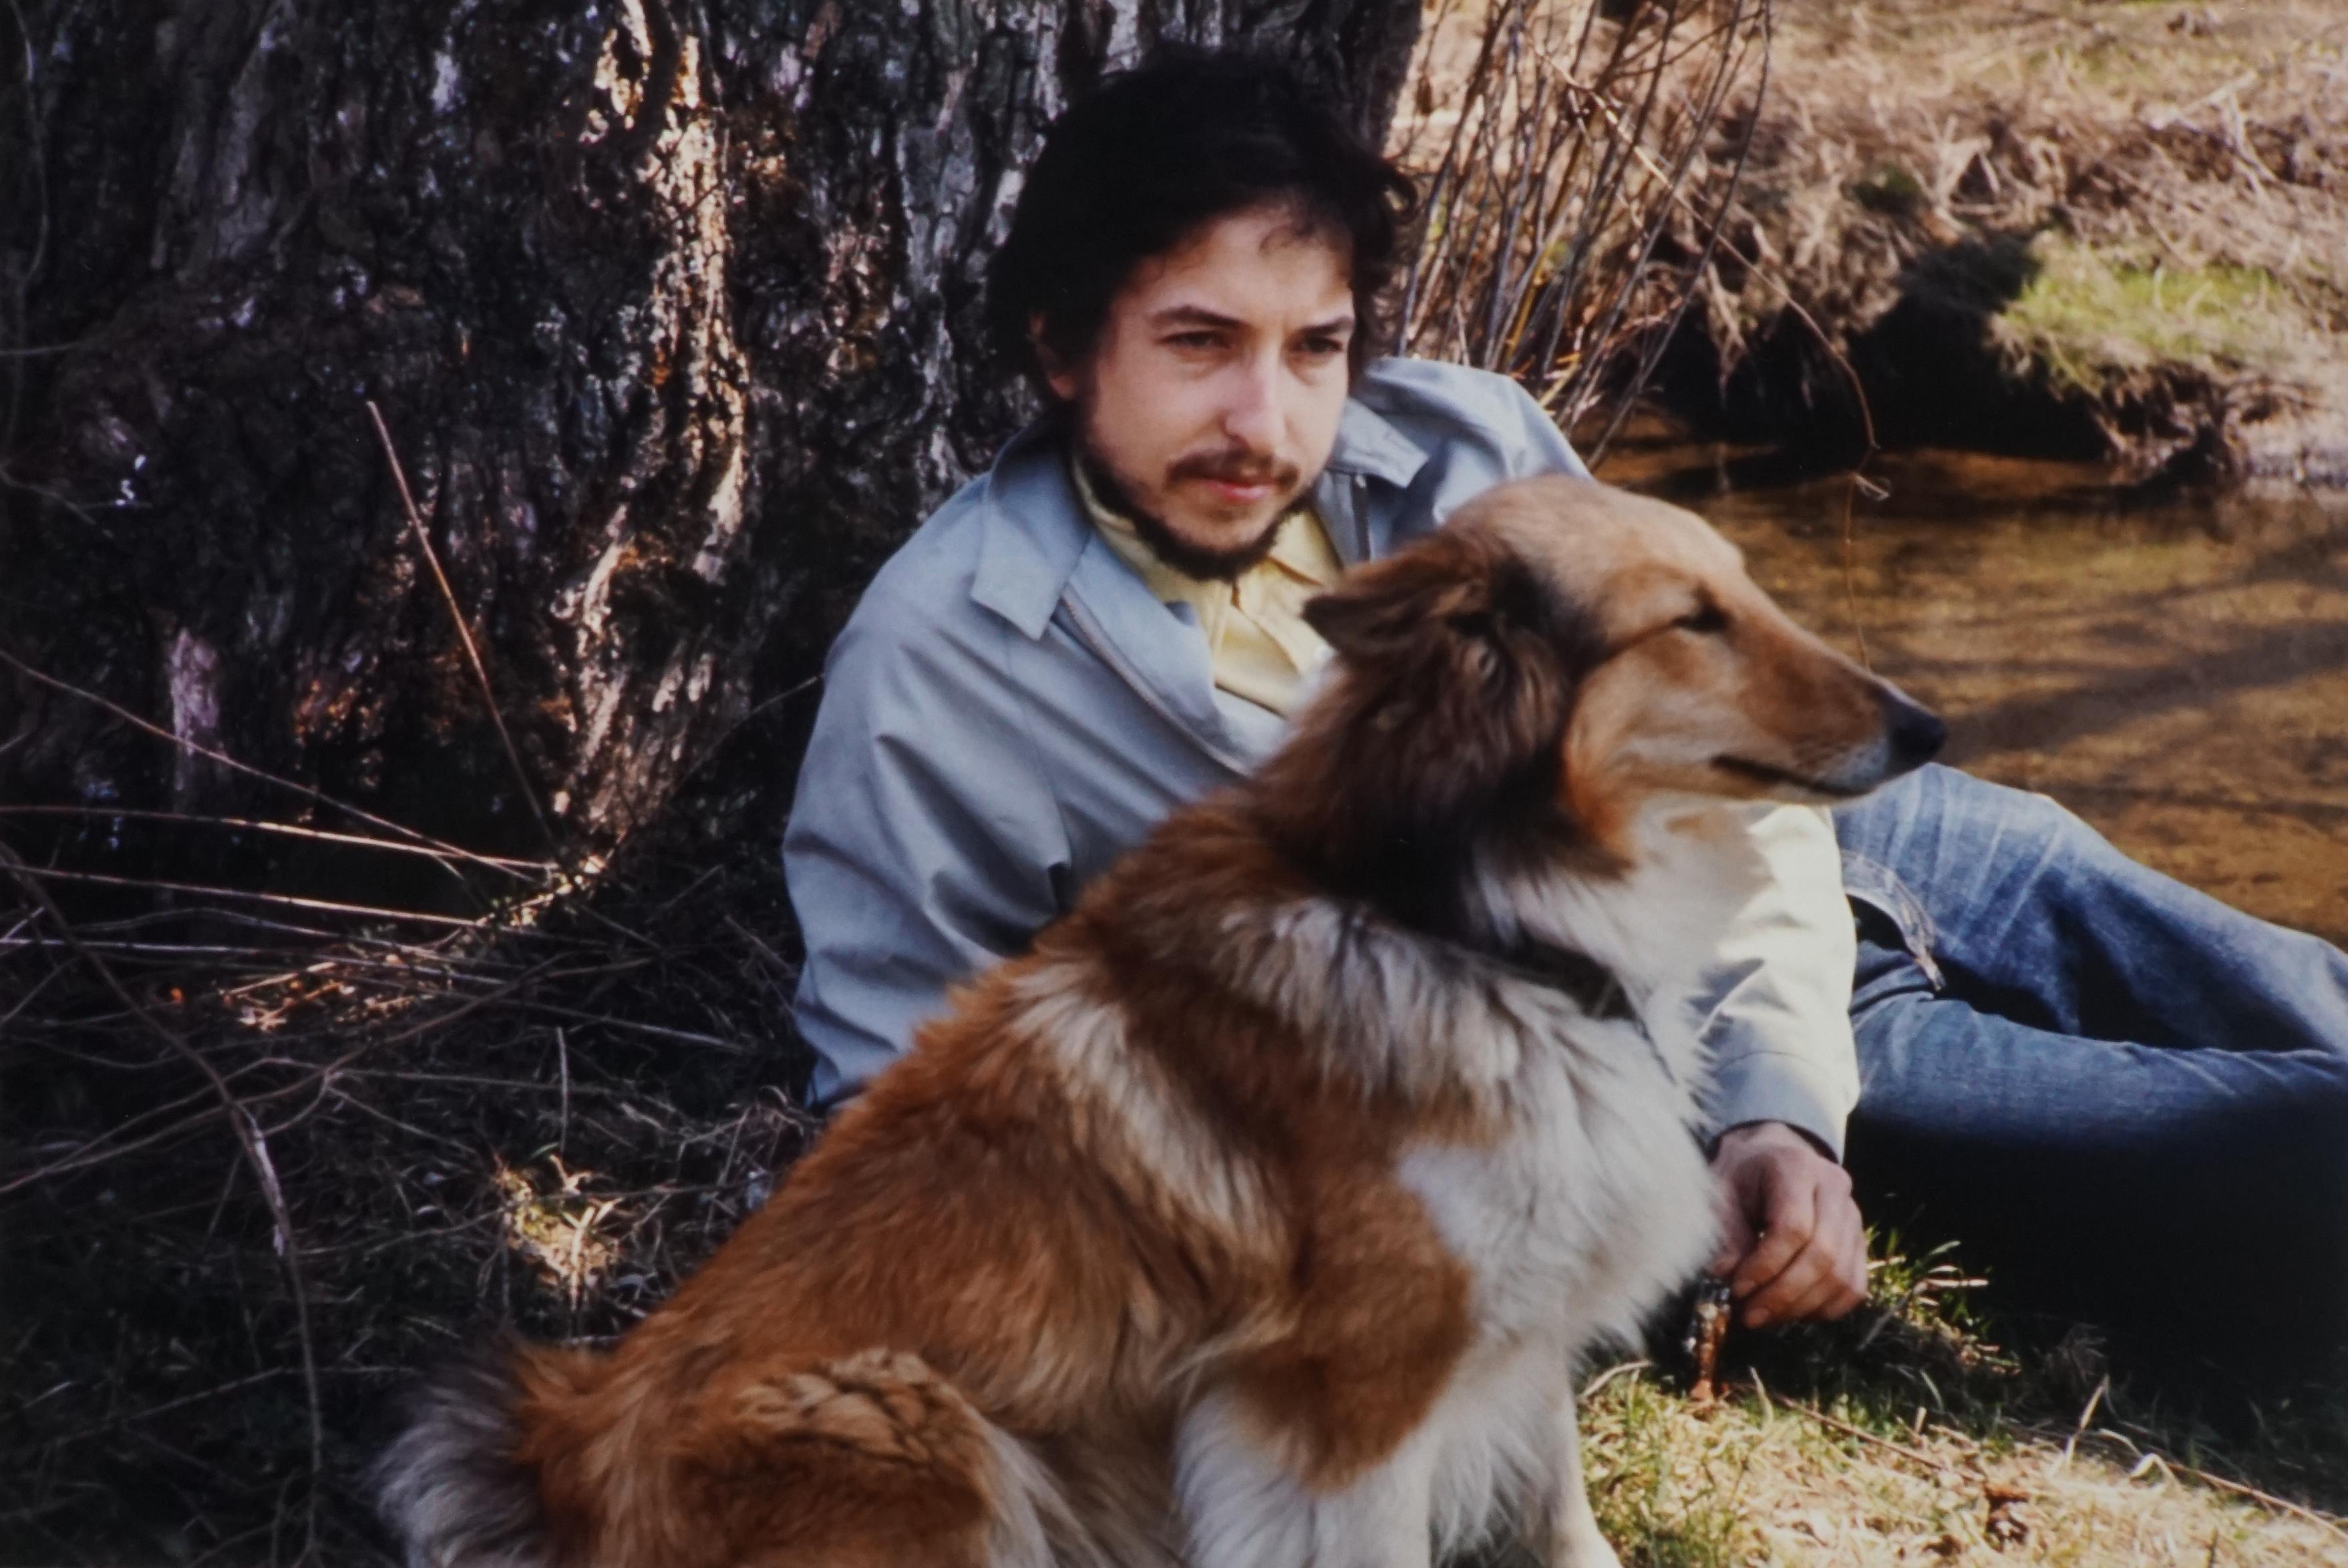 John Cohen Color Photograph - Bob Dylan (Lying Under Tree with Dog), 1970